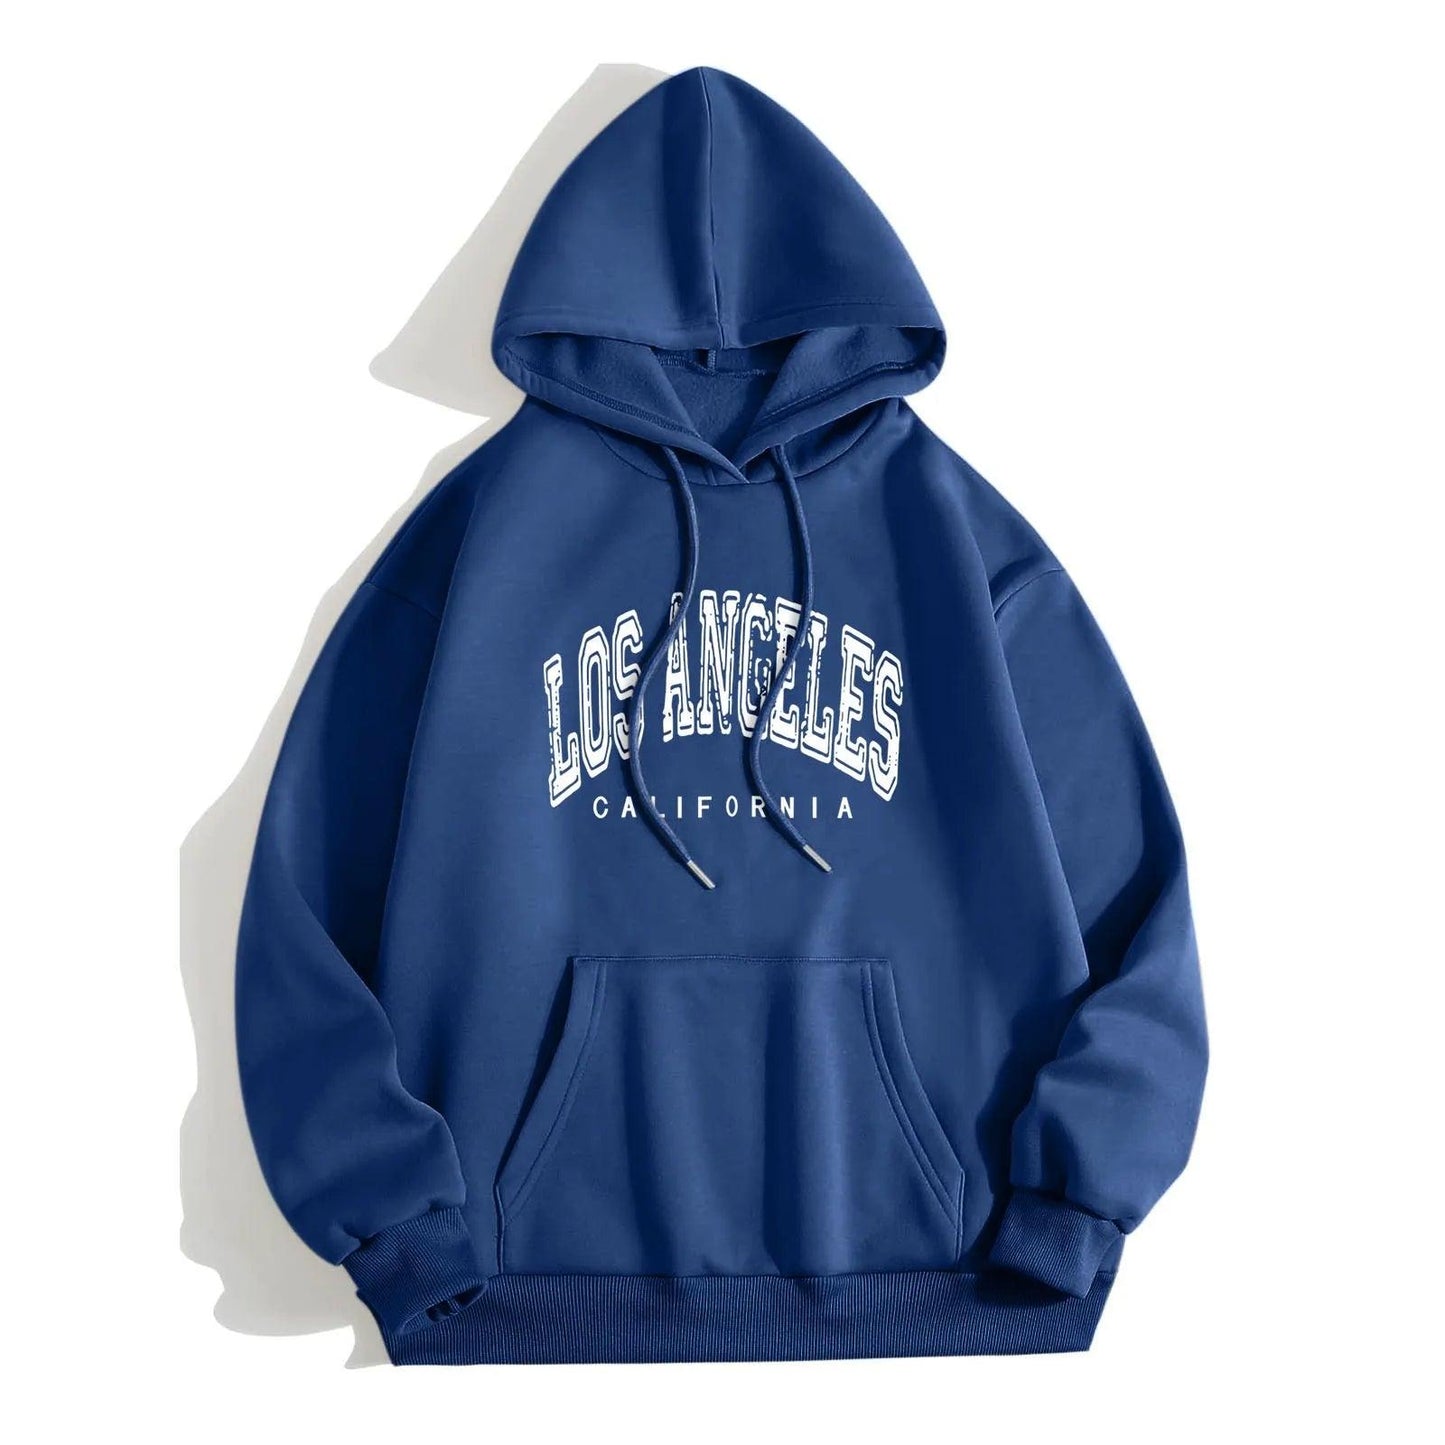 Autumn in Los Angeles Hoodie - itsshirty